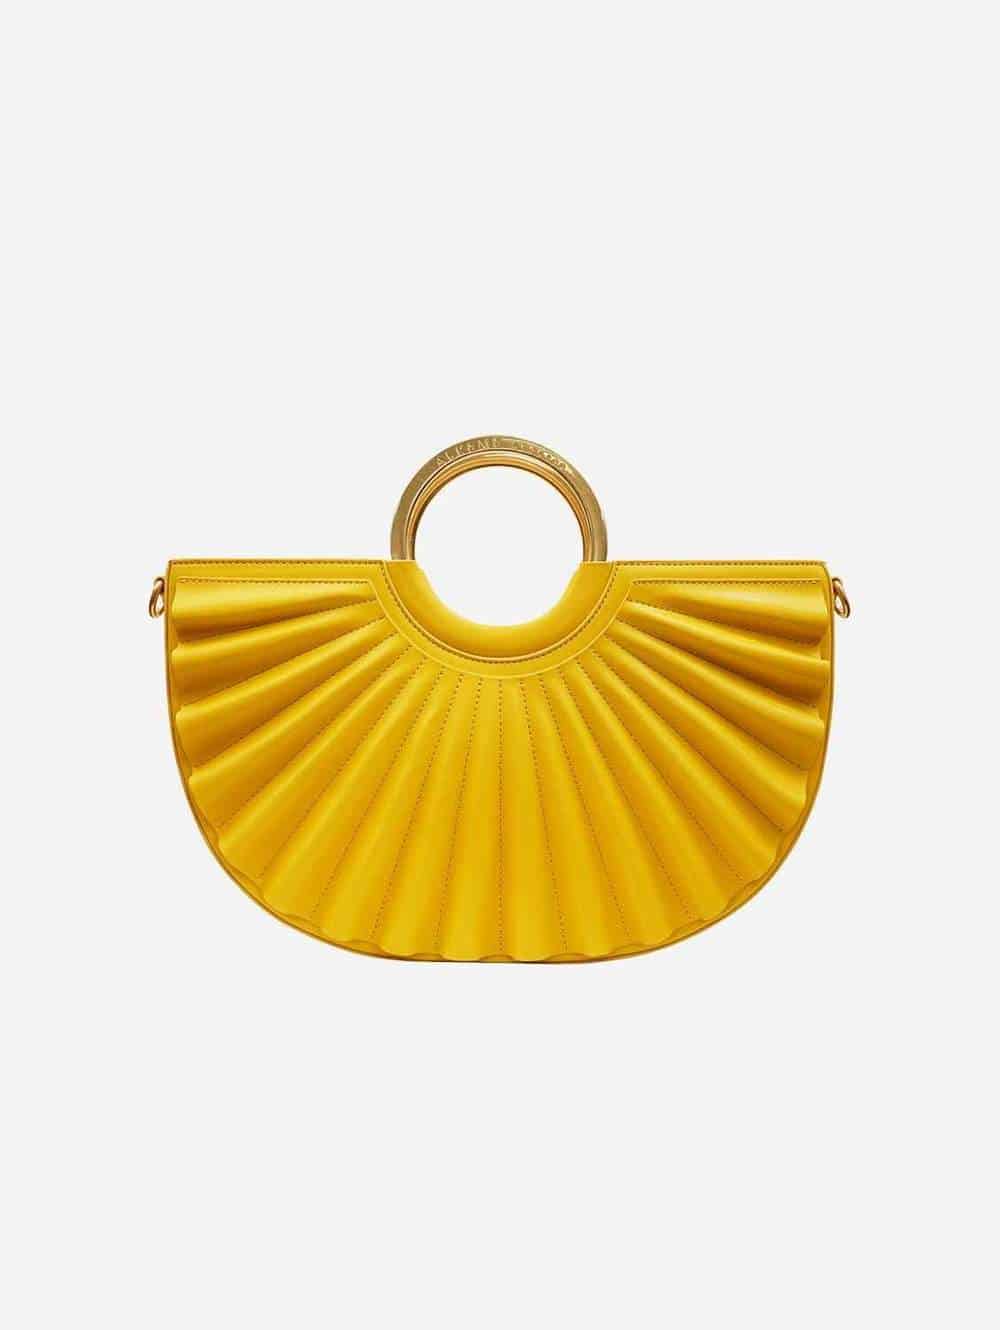 Yellow ruched bag from Alkeme Atelier